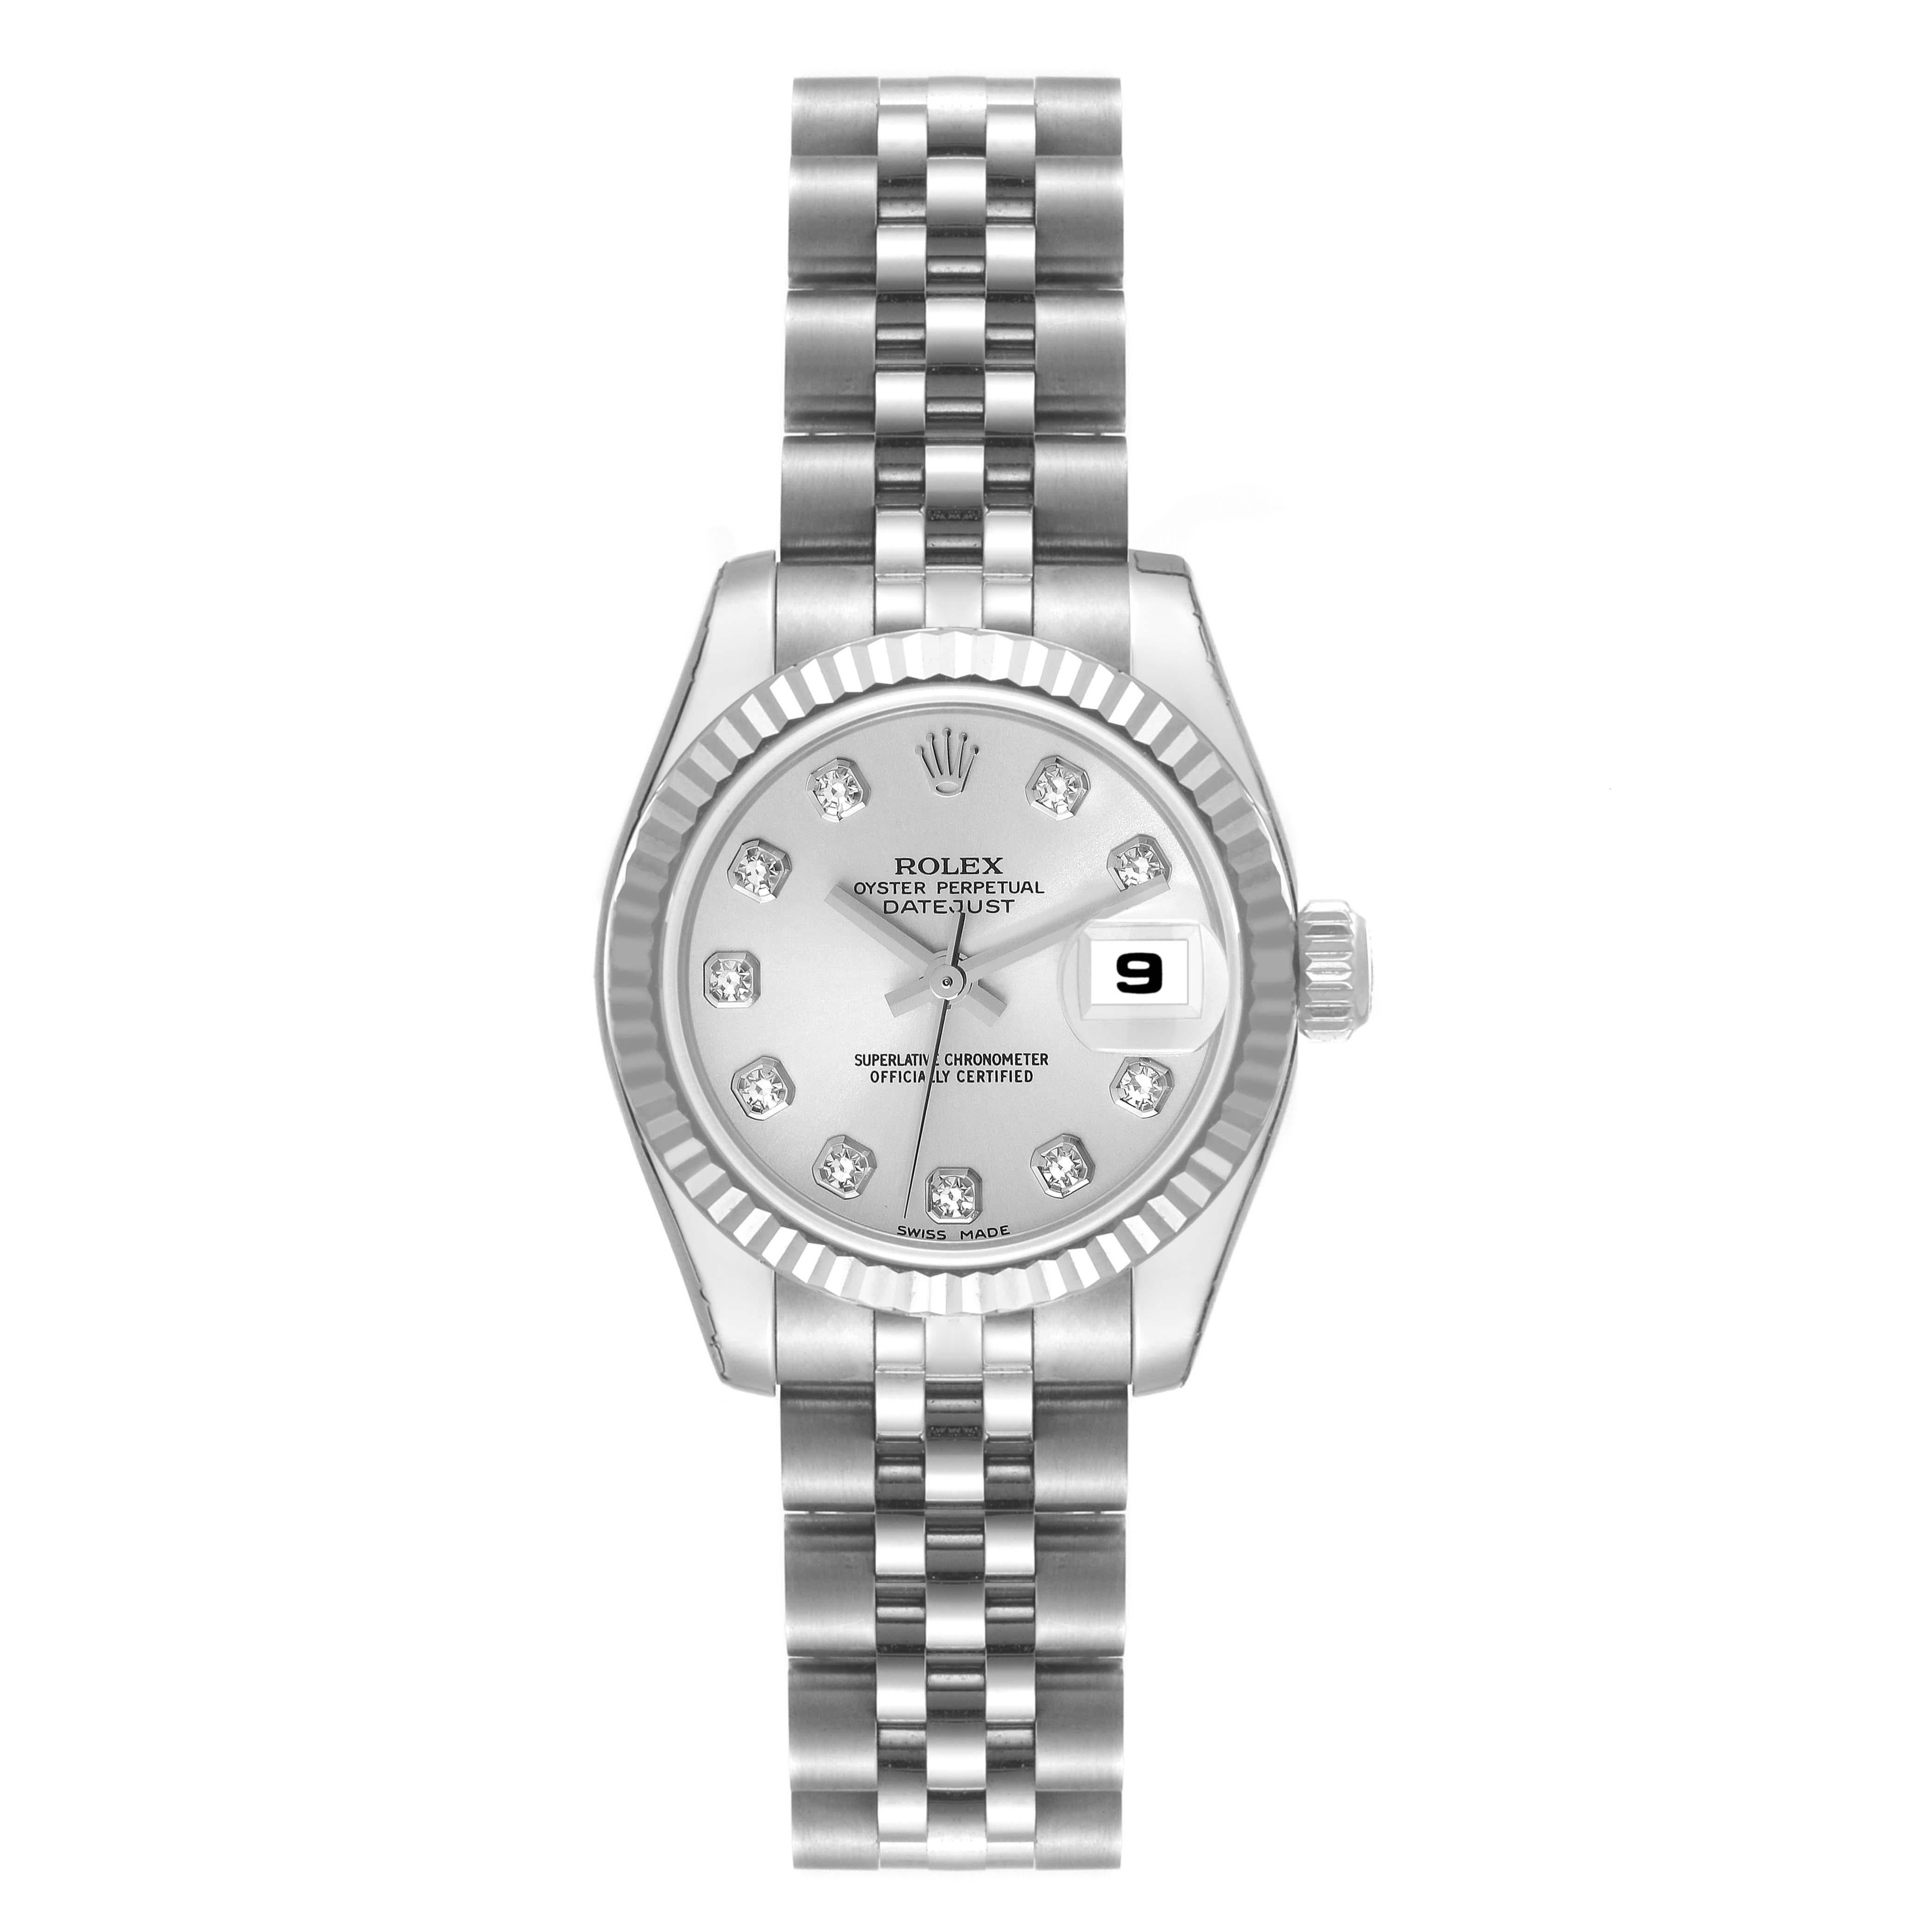 Rolex Datejust Steel White Gold Diamond Dial Ladies Watch 179174 Unworn NOS. Officially certified chronometer automatic self-winding movement. Stainless steel oyster case 26.0 mm in diameter. Rolex logo on the crown. 18K white gold fluted bezel.